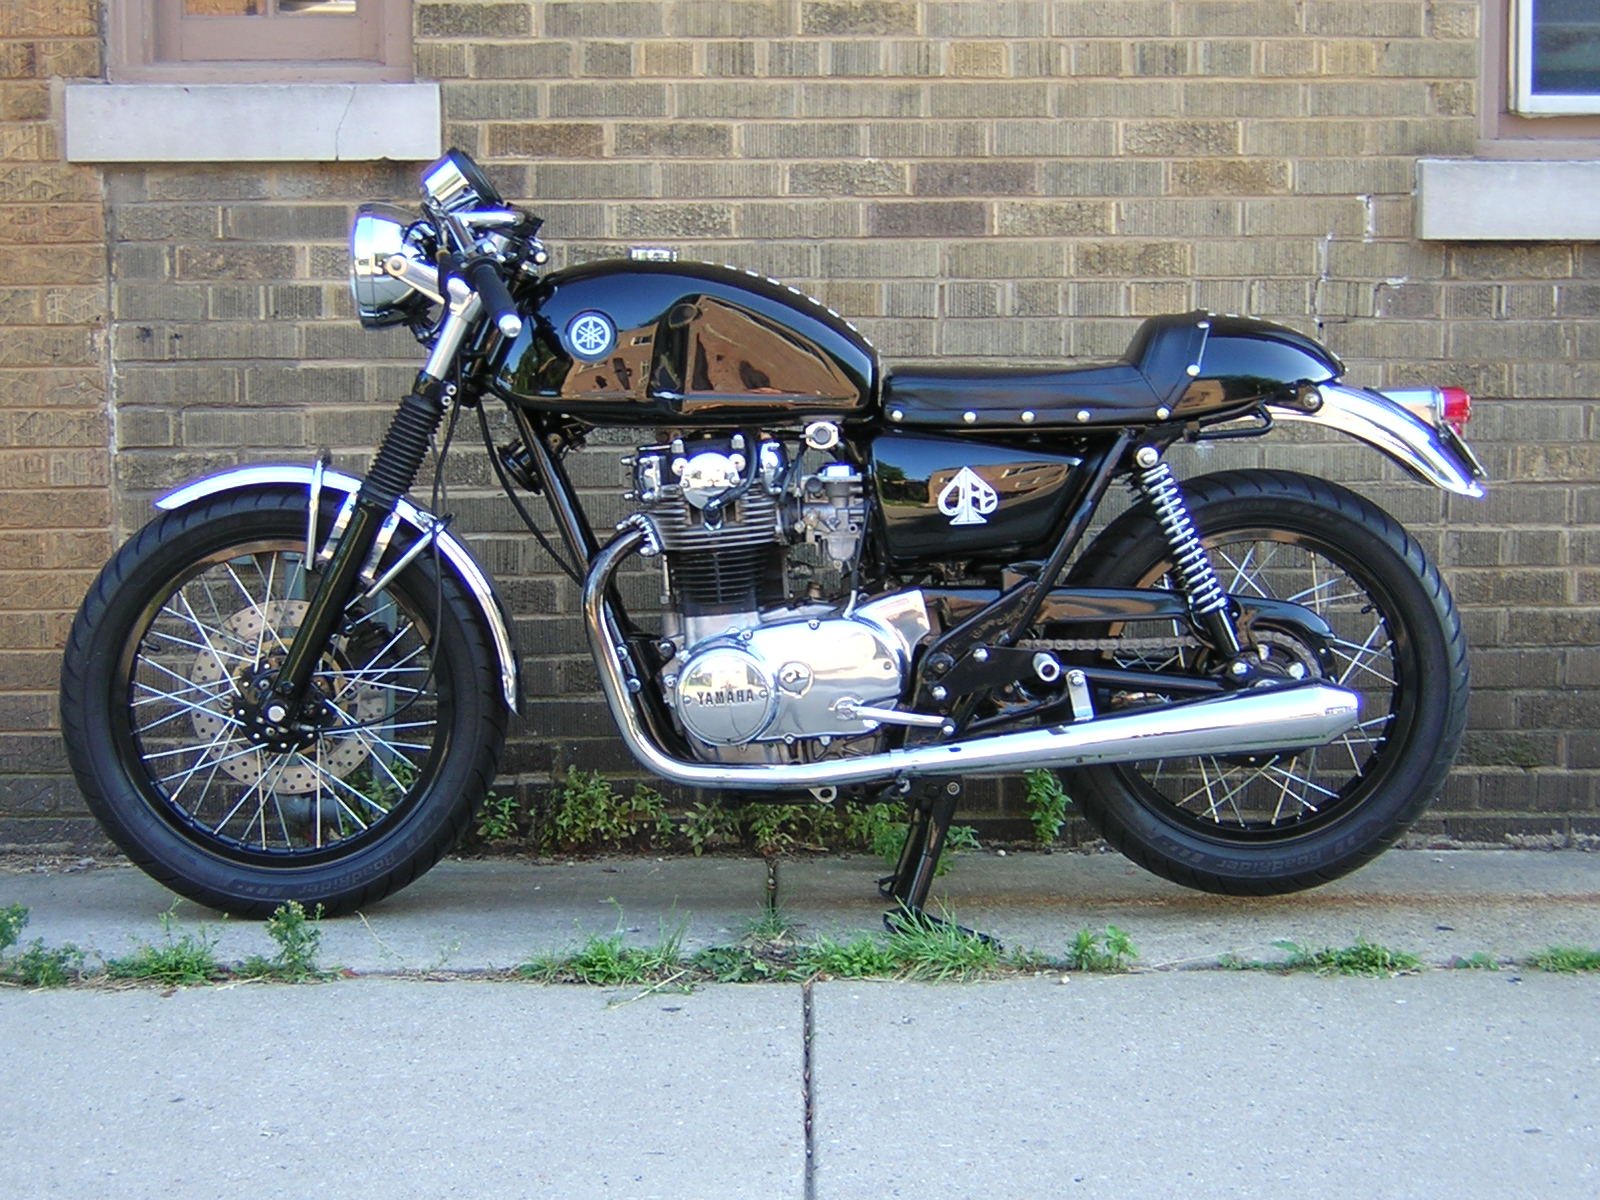 My Way to Ride: Yamaha XS650 Cafe Racer Modified